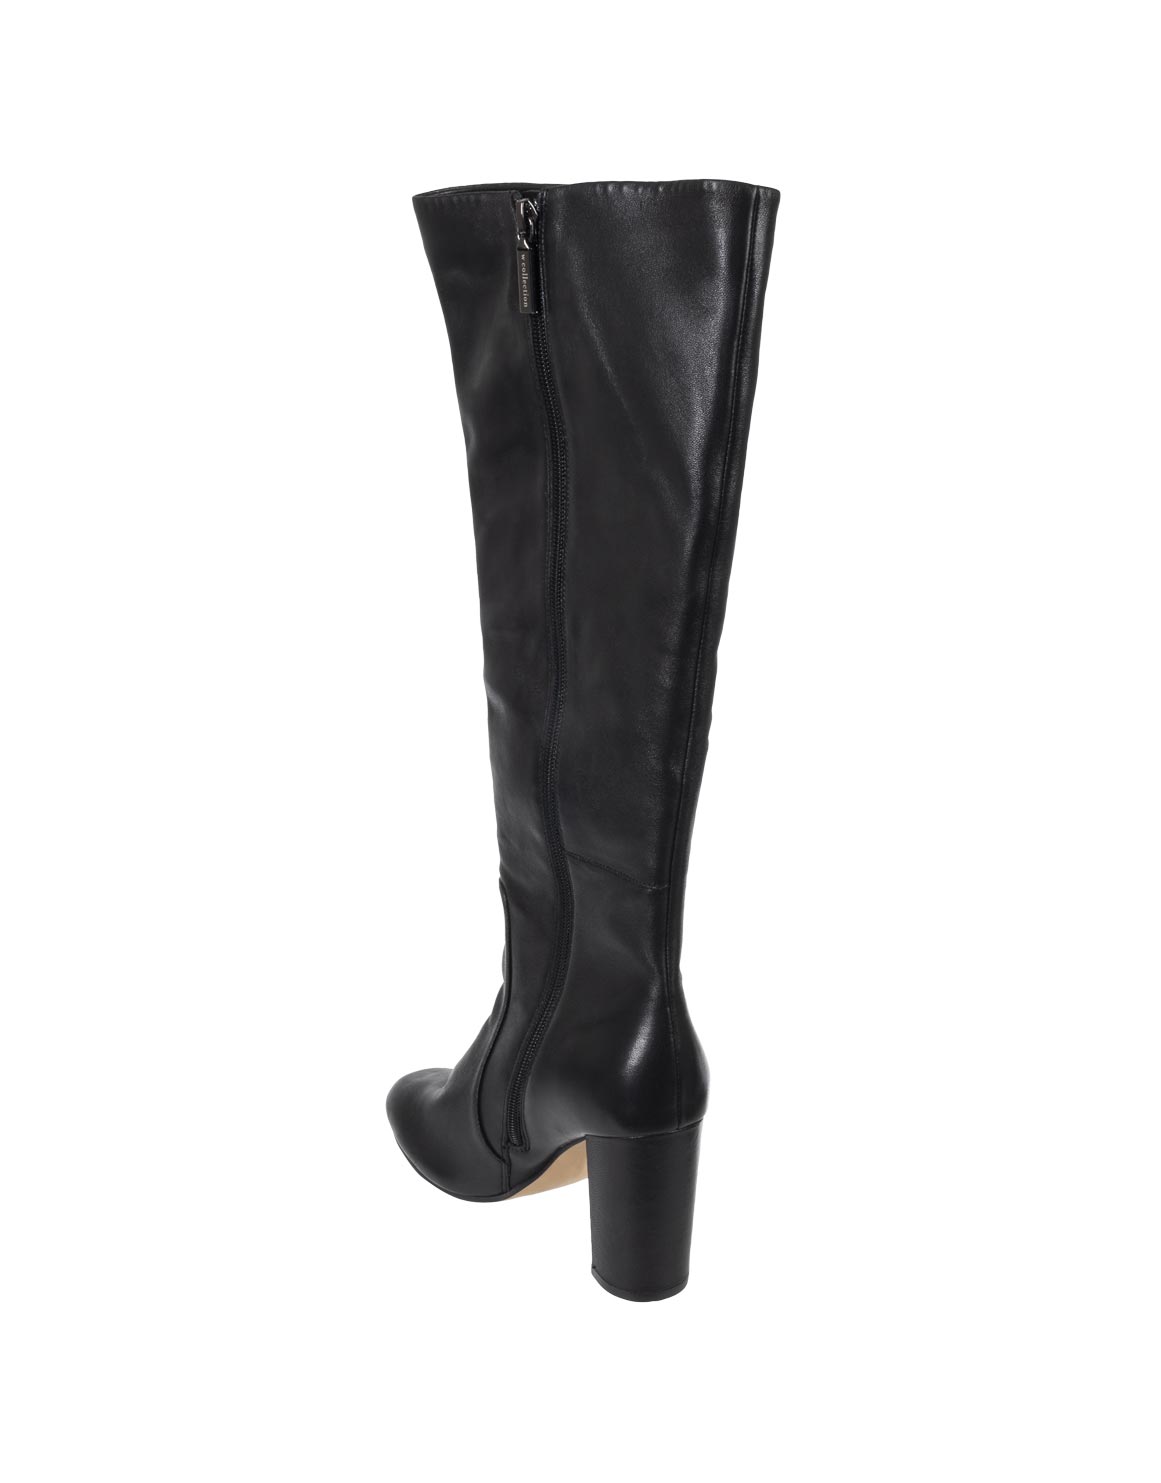 woolworths black boots \u003e Up to 68% OFF 